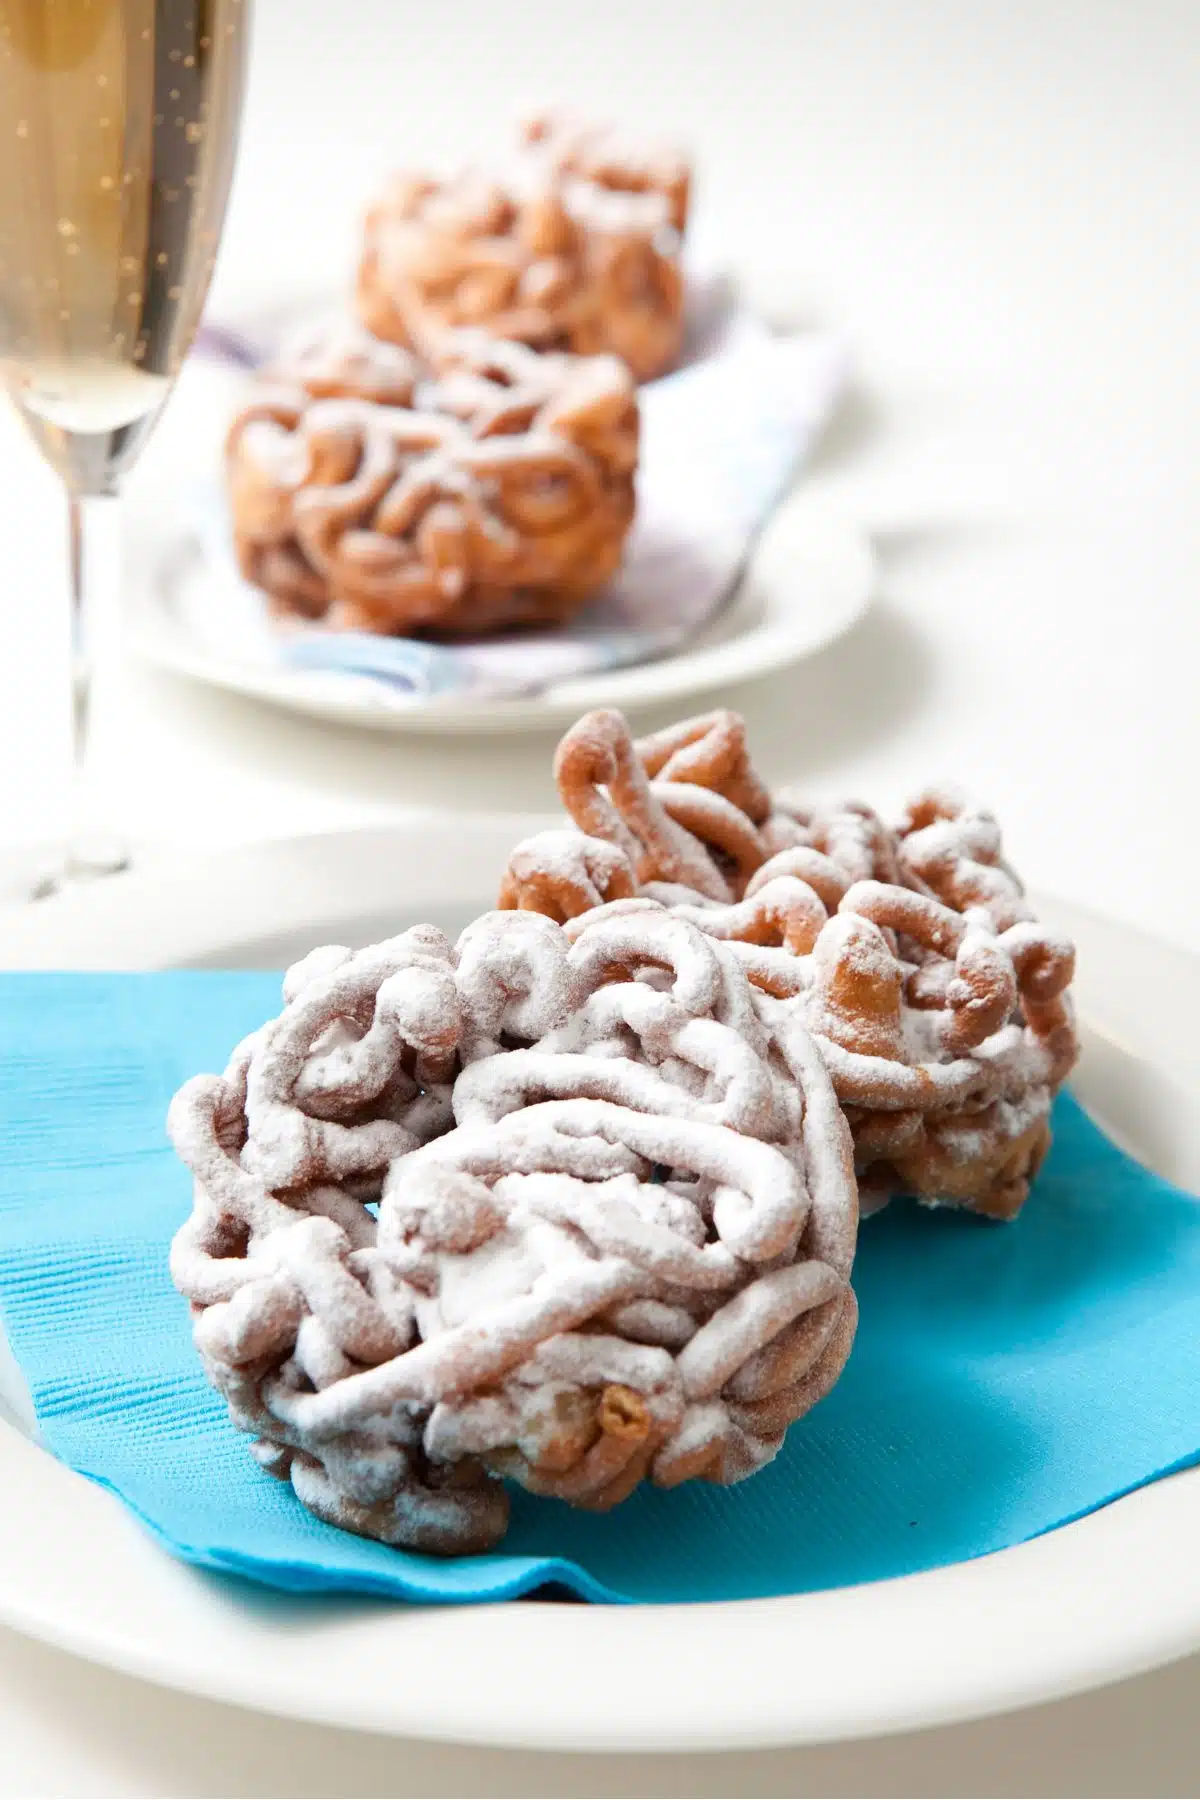 Funnel cakes with sparkling wine and decorated with powdered sugar.  